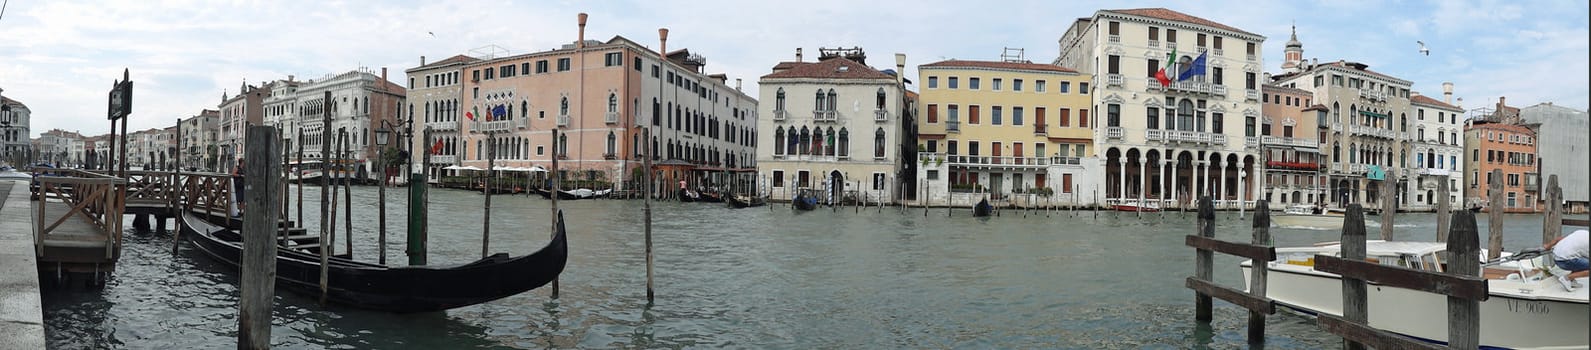 panoramic view of grand canal in Venice